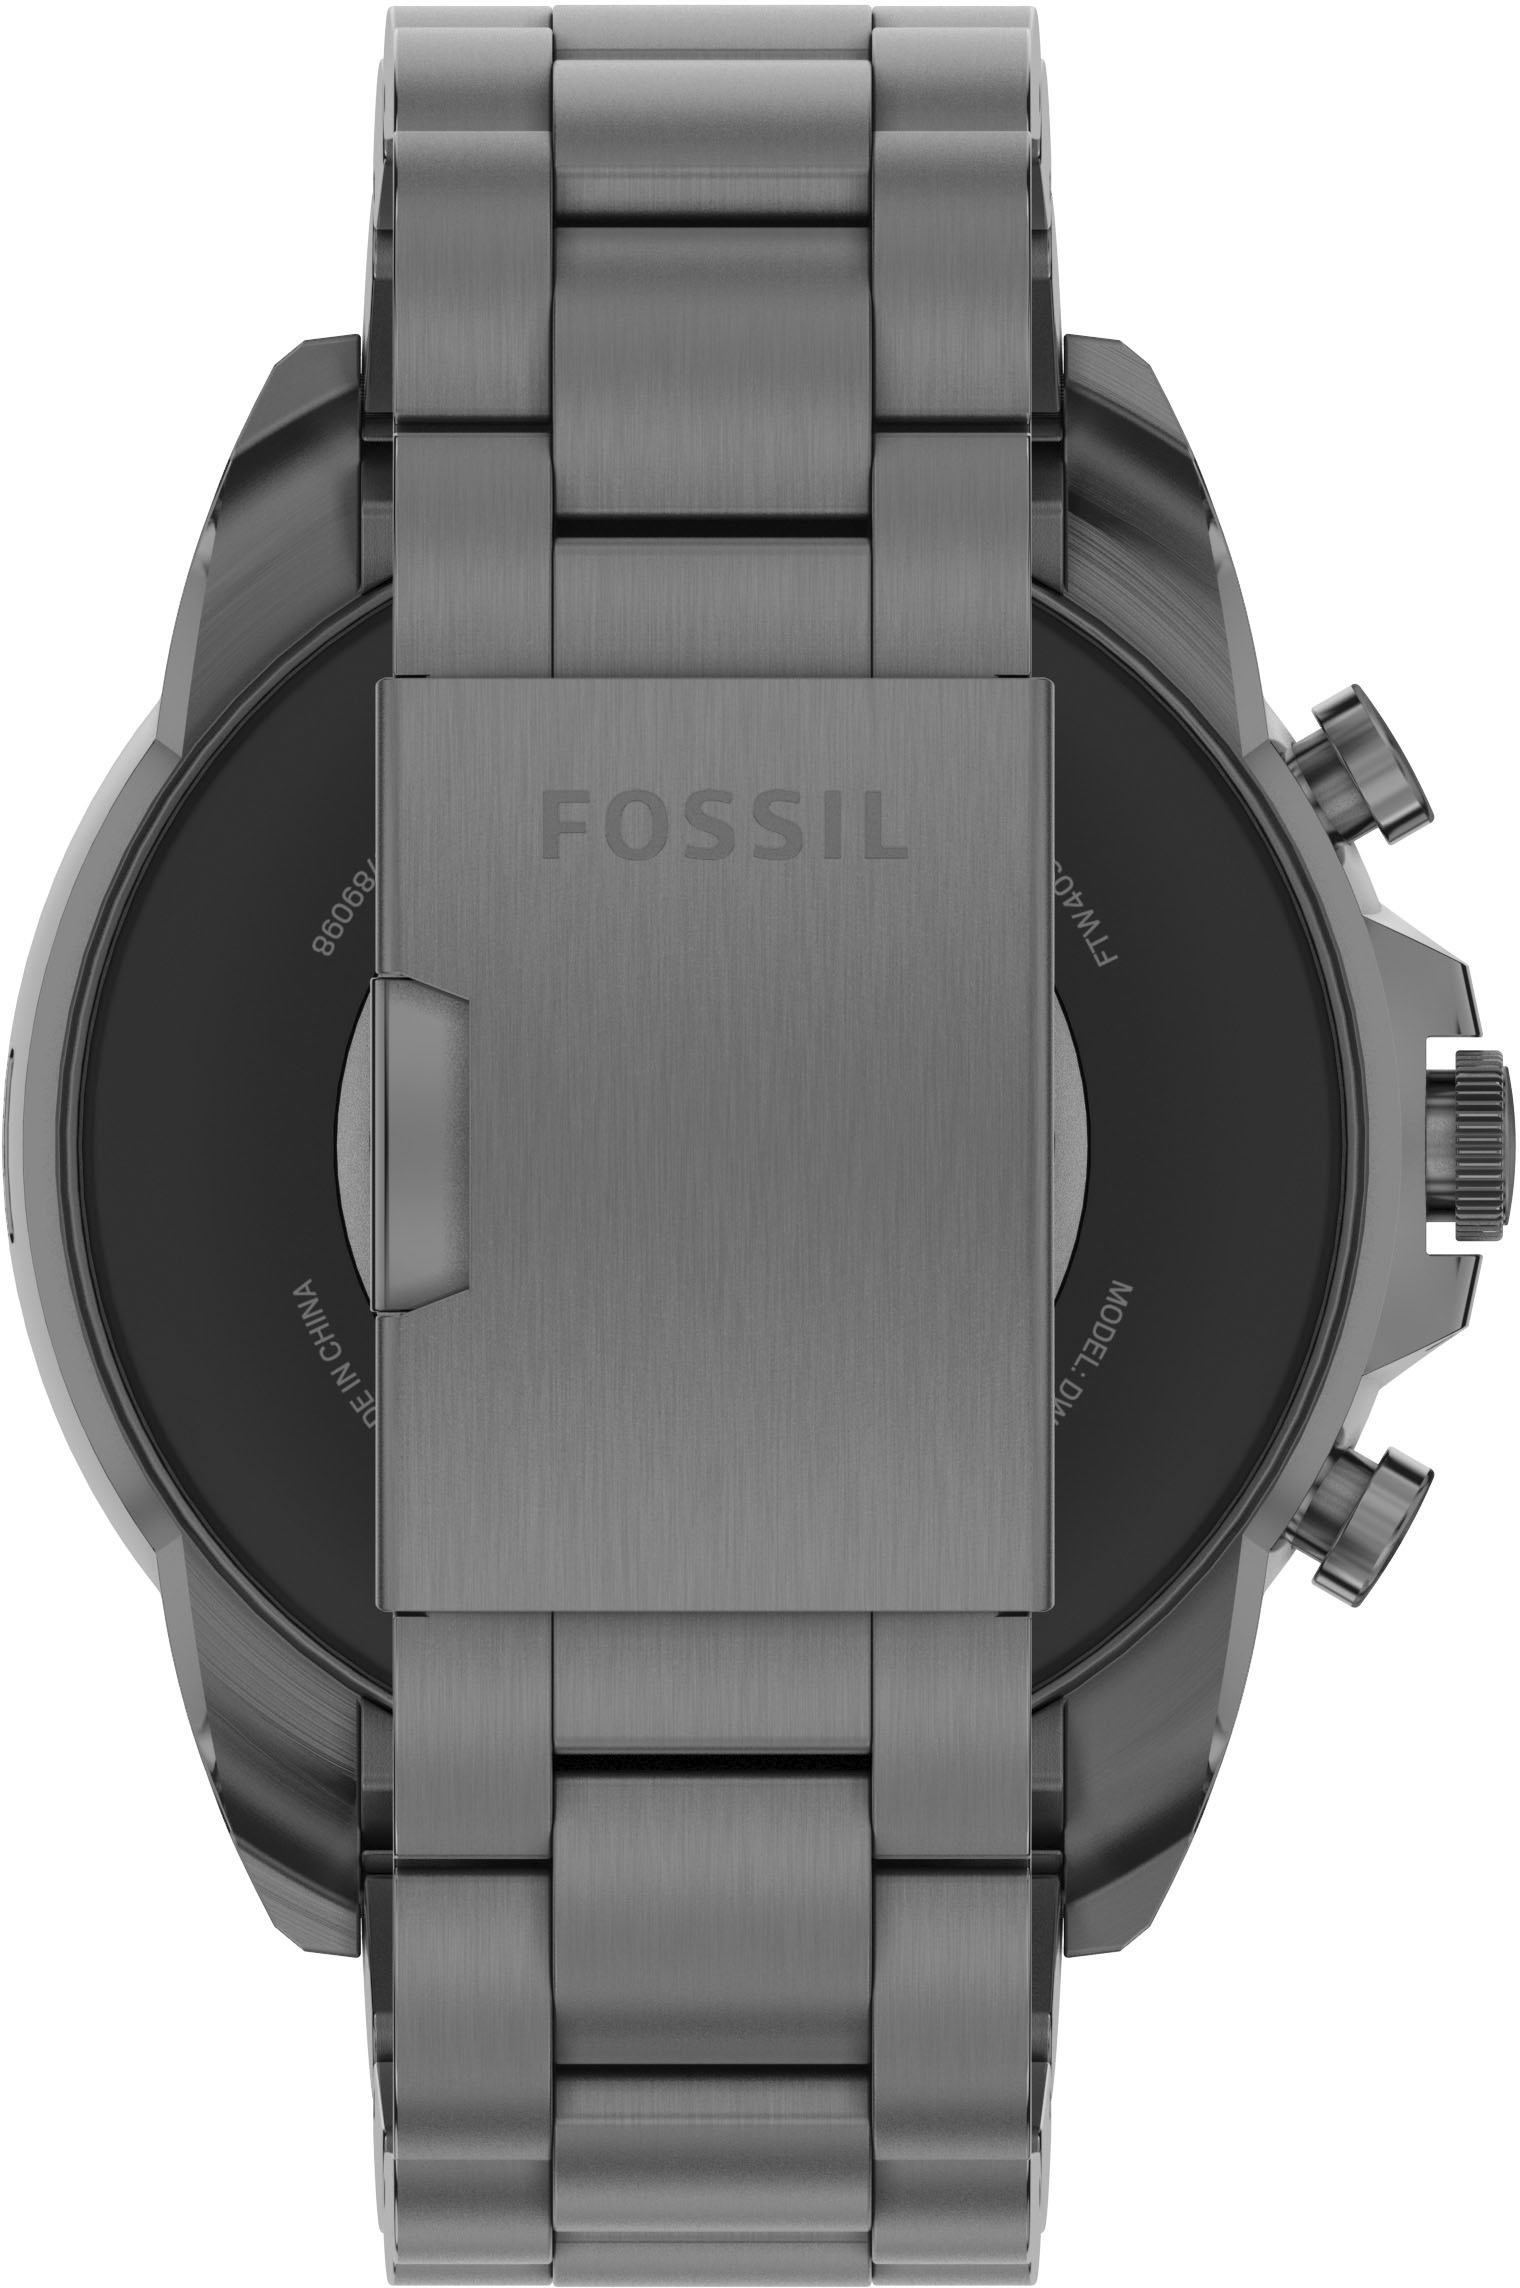 Angle View: Fossil - Gen 5e Smartwatch 42mm Stainless Steel Mesh - Rose Gold